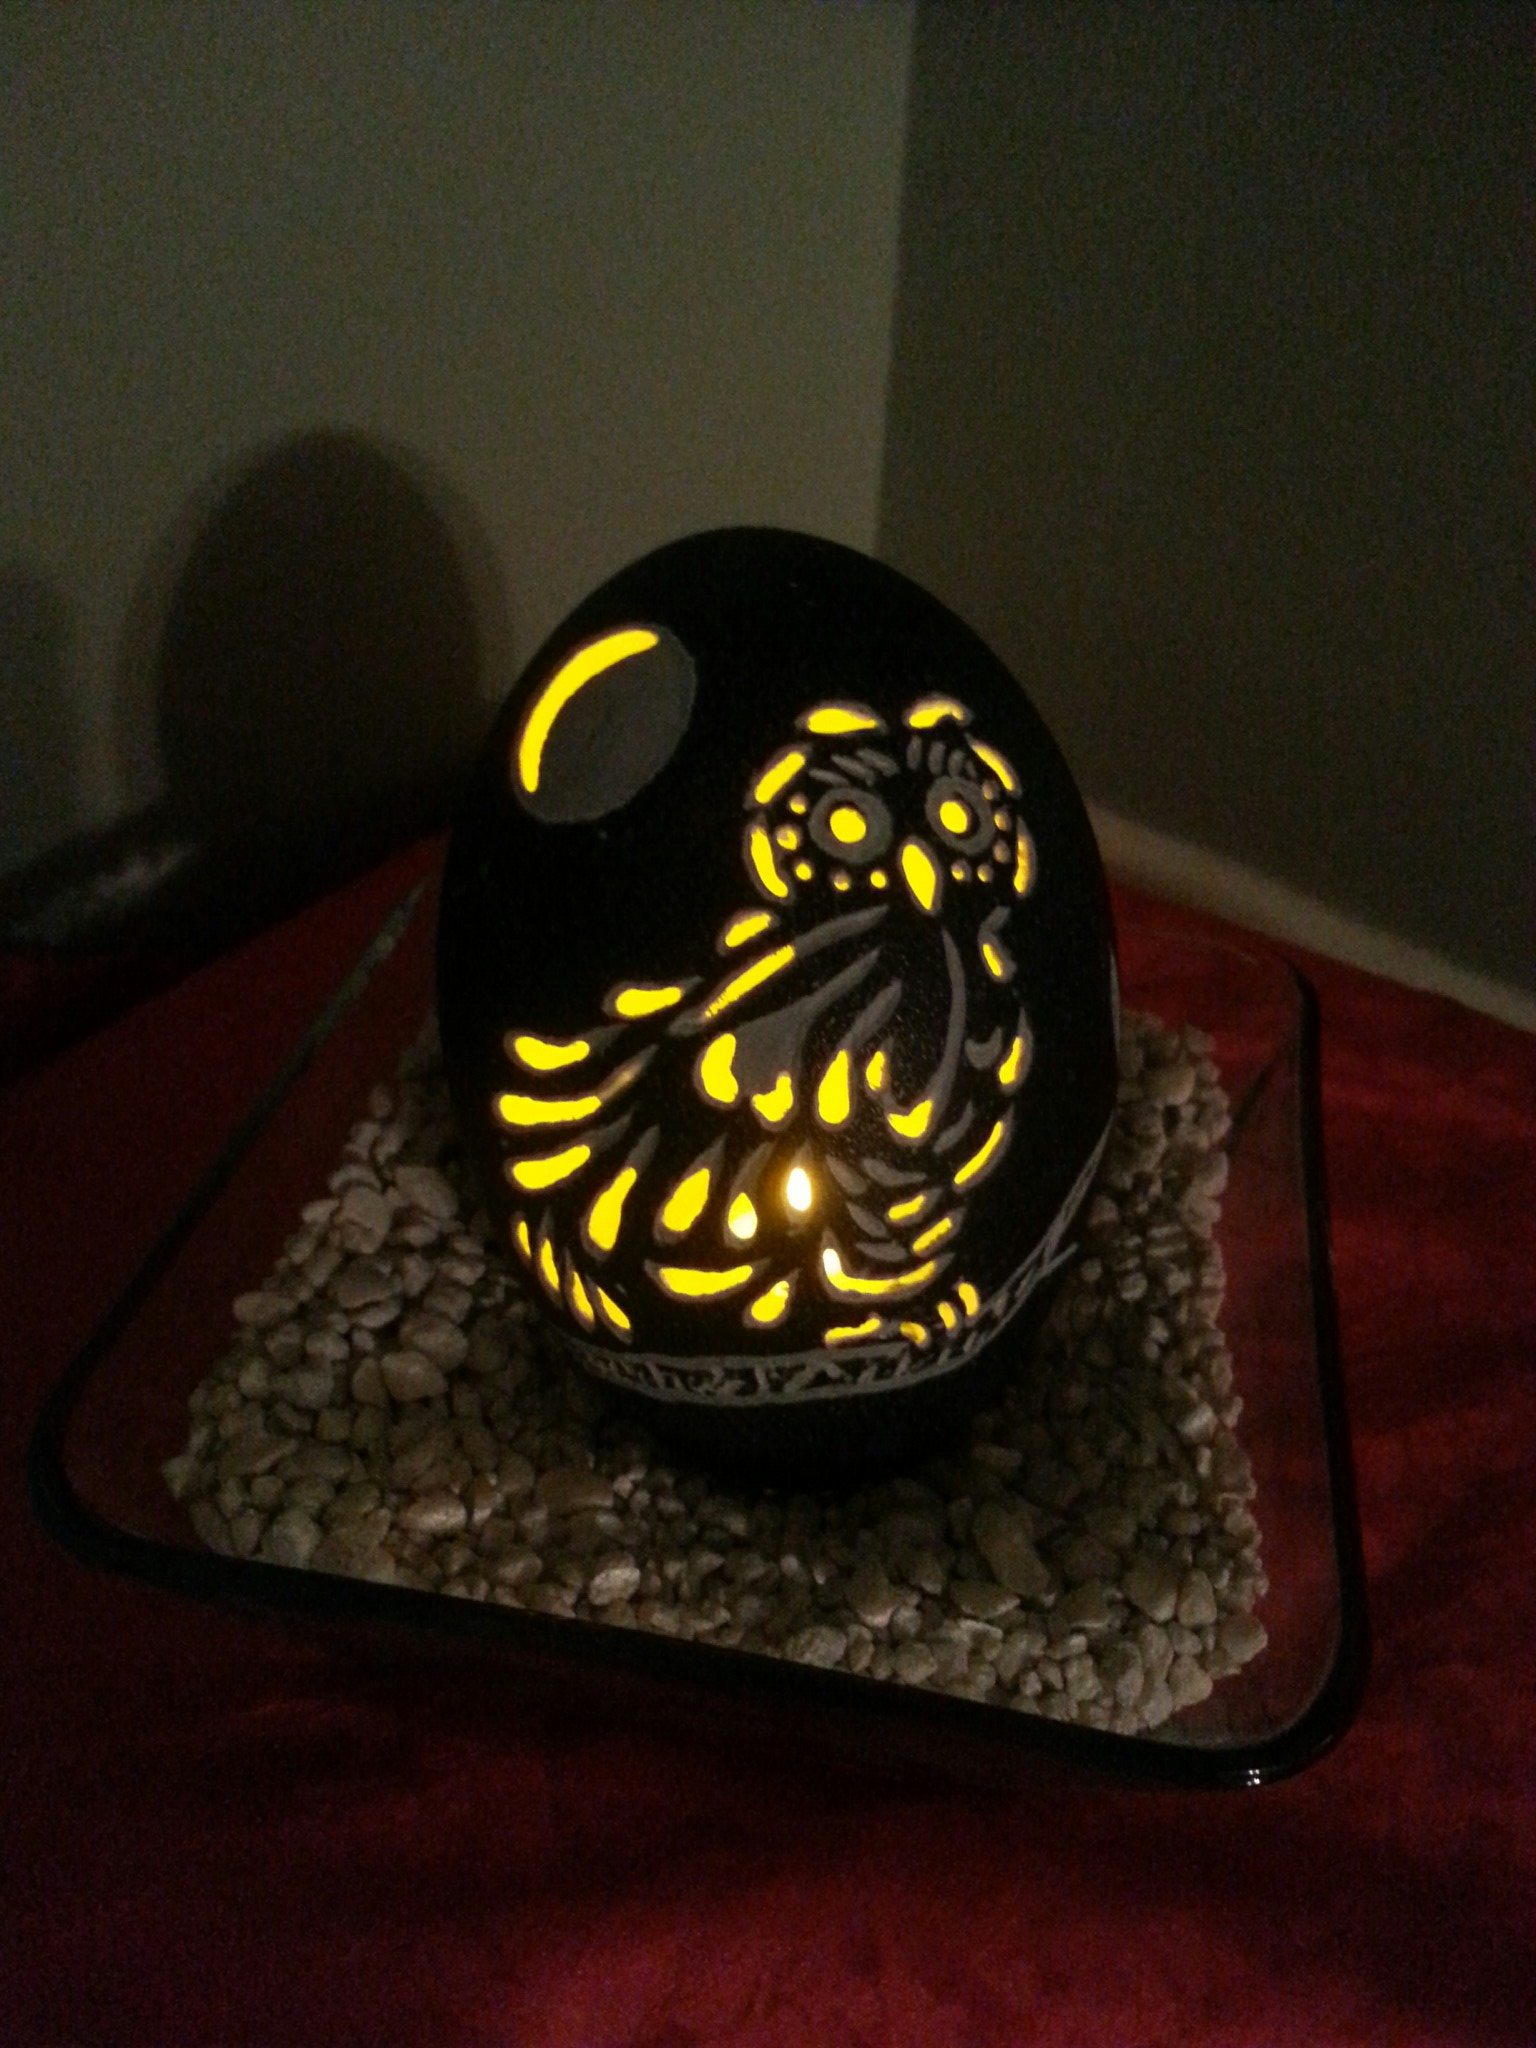 Add a light to the Owl Emu Egg or any of the carved eggs and it makes a beautiful night light or centerpiece for a romantic evening.